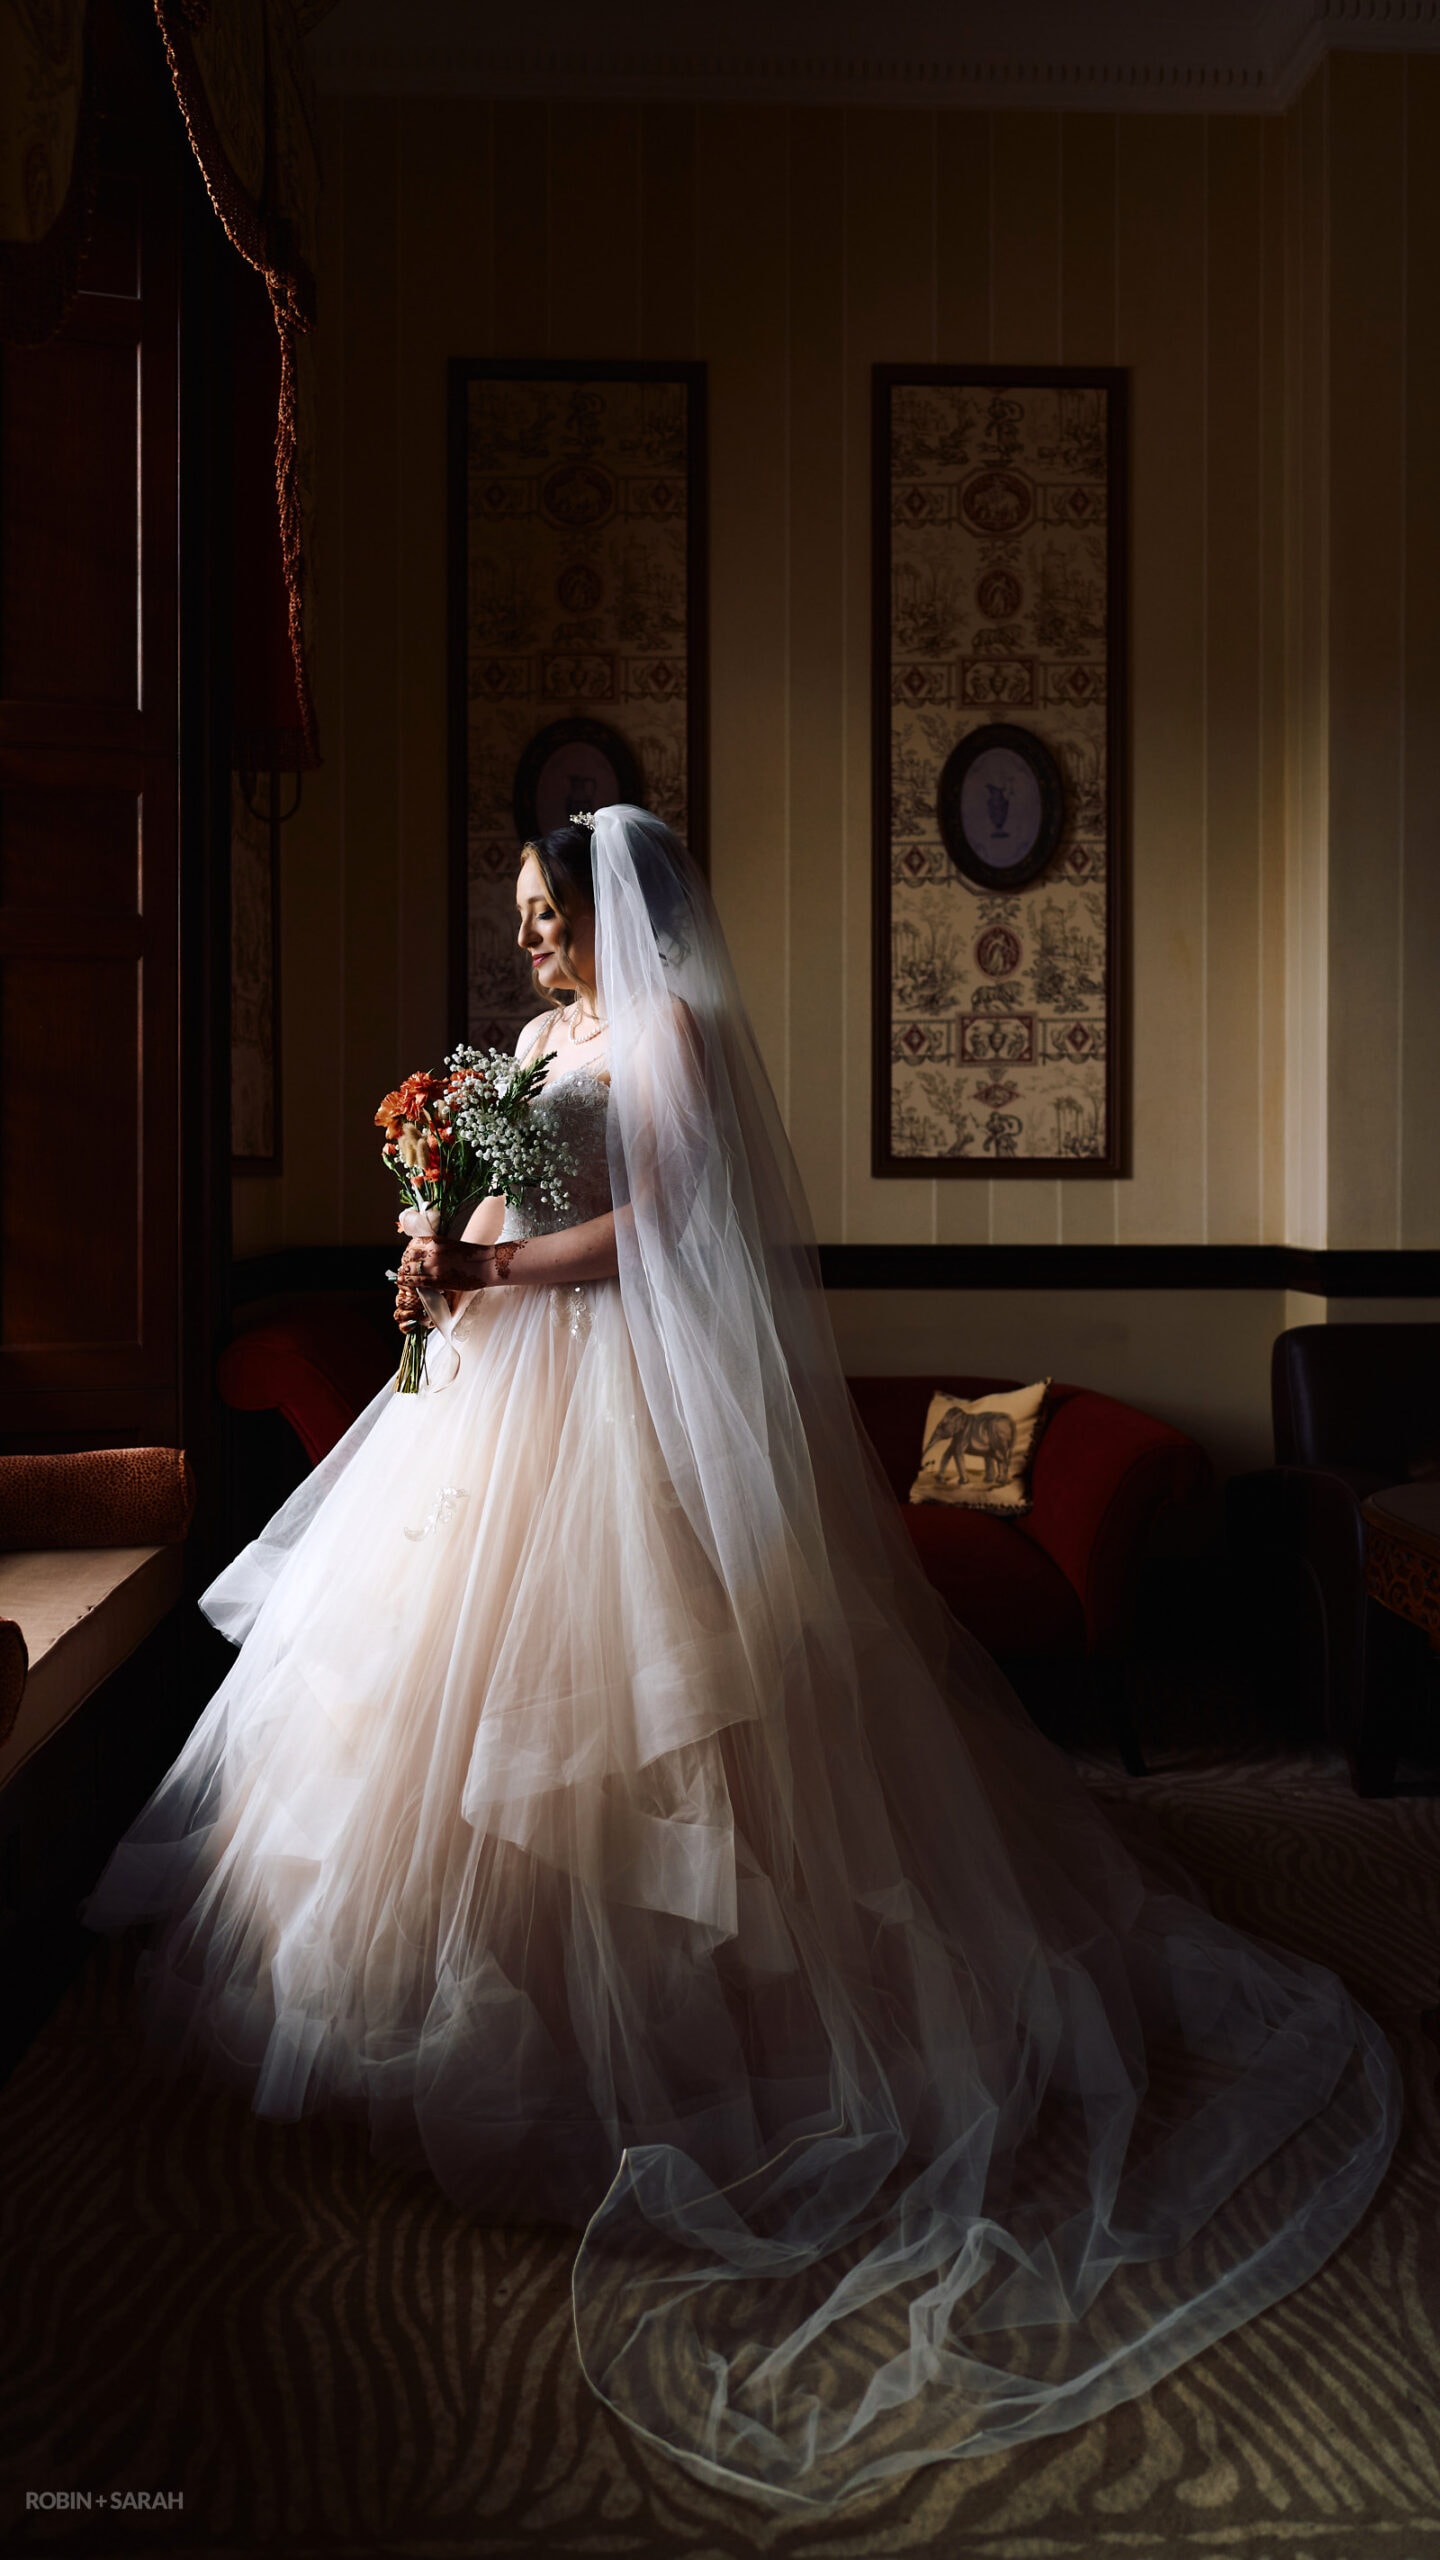 Bride with long veil and beautiful wedding dress stands in window light at Spring Grove House